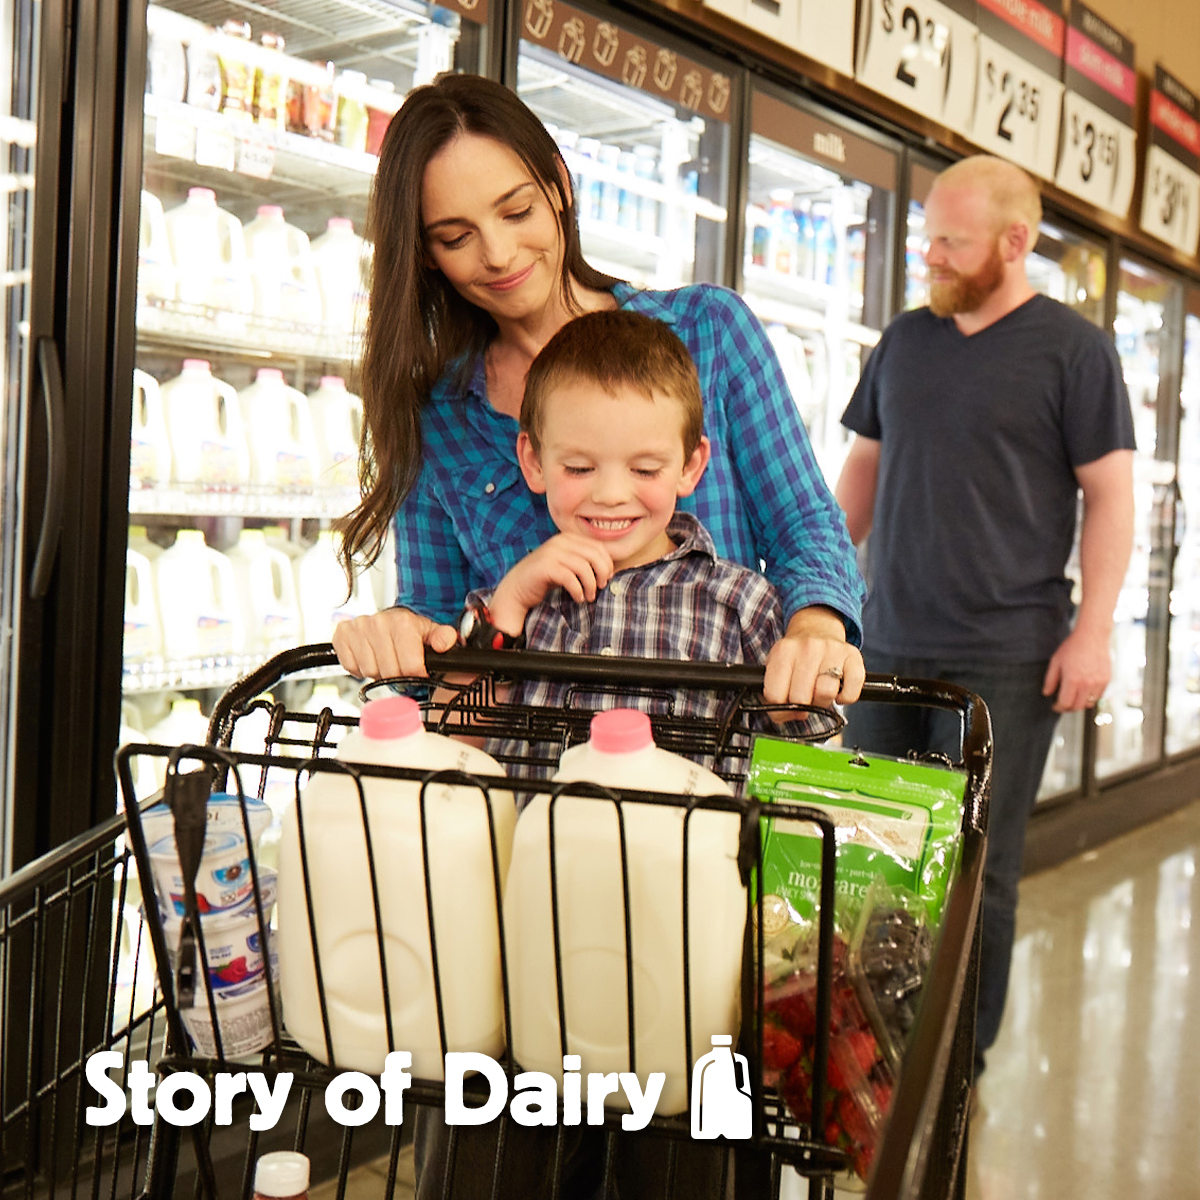 The Story of Dairy: Where You Purchase Your Milk